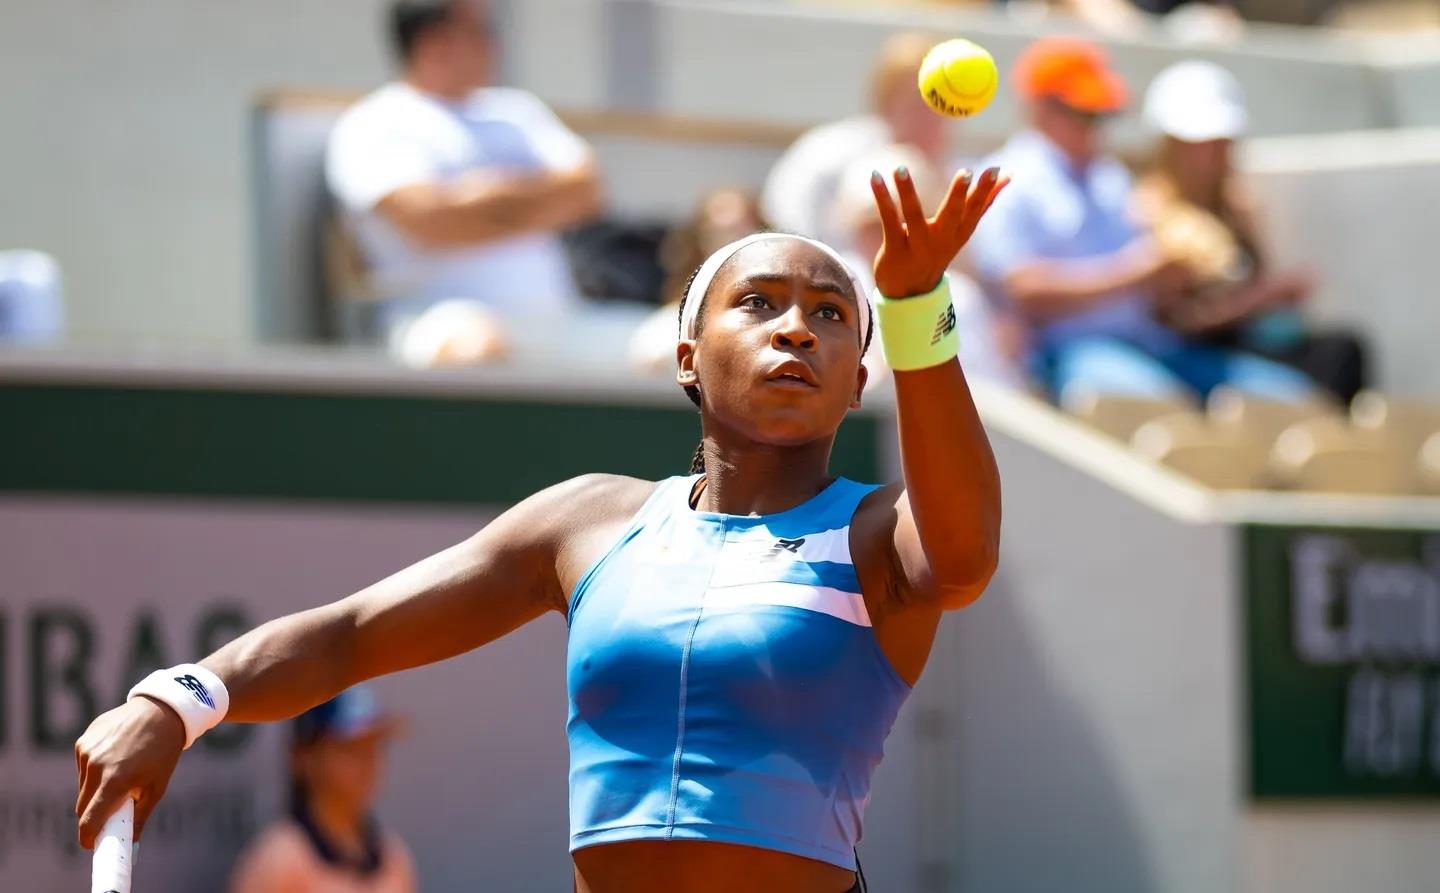  French Open: Coco Gauff Survives A Stern Test To Reach Second Round 